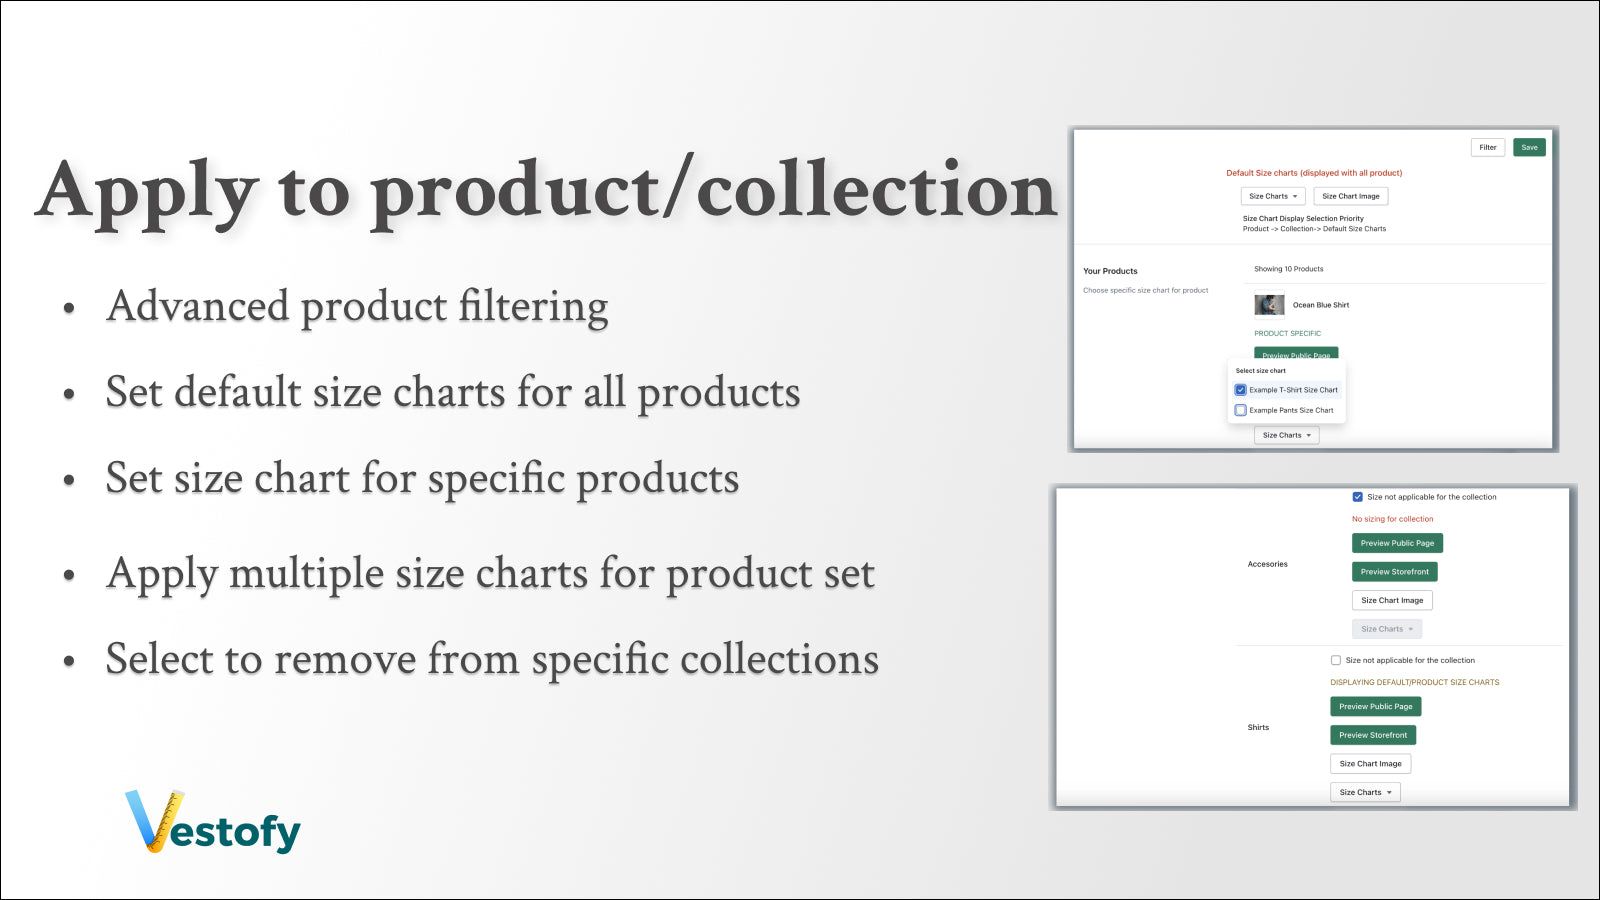 Apply size chart to product and collection